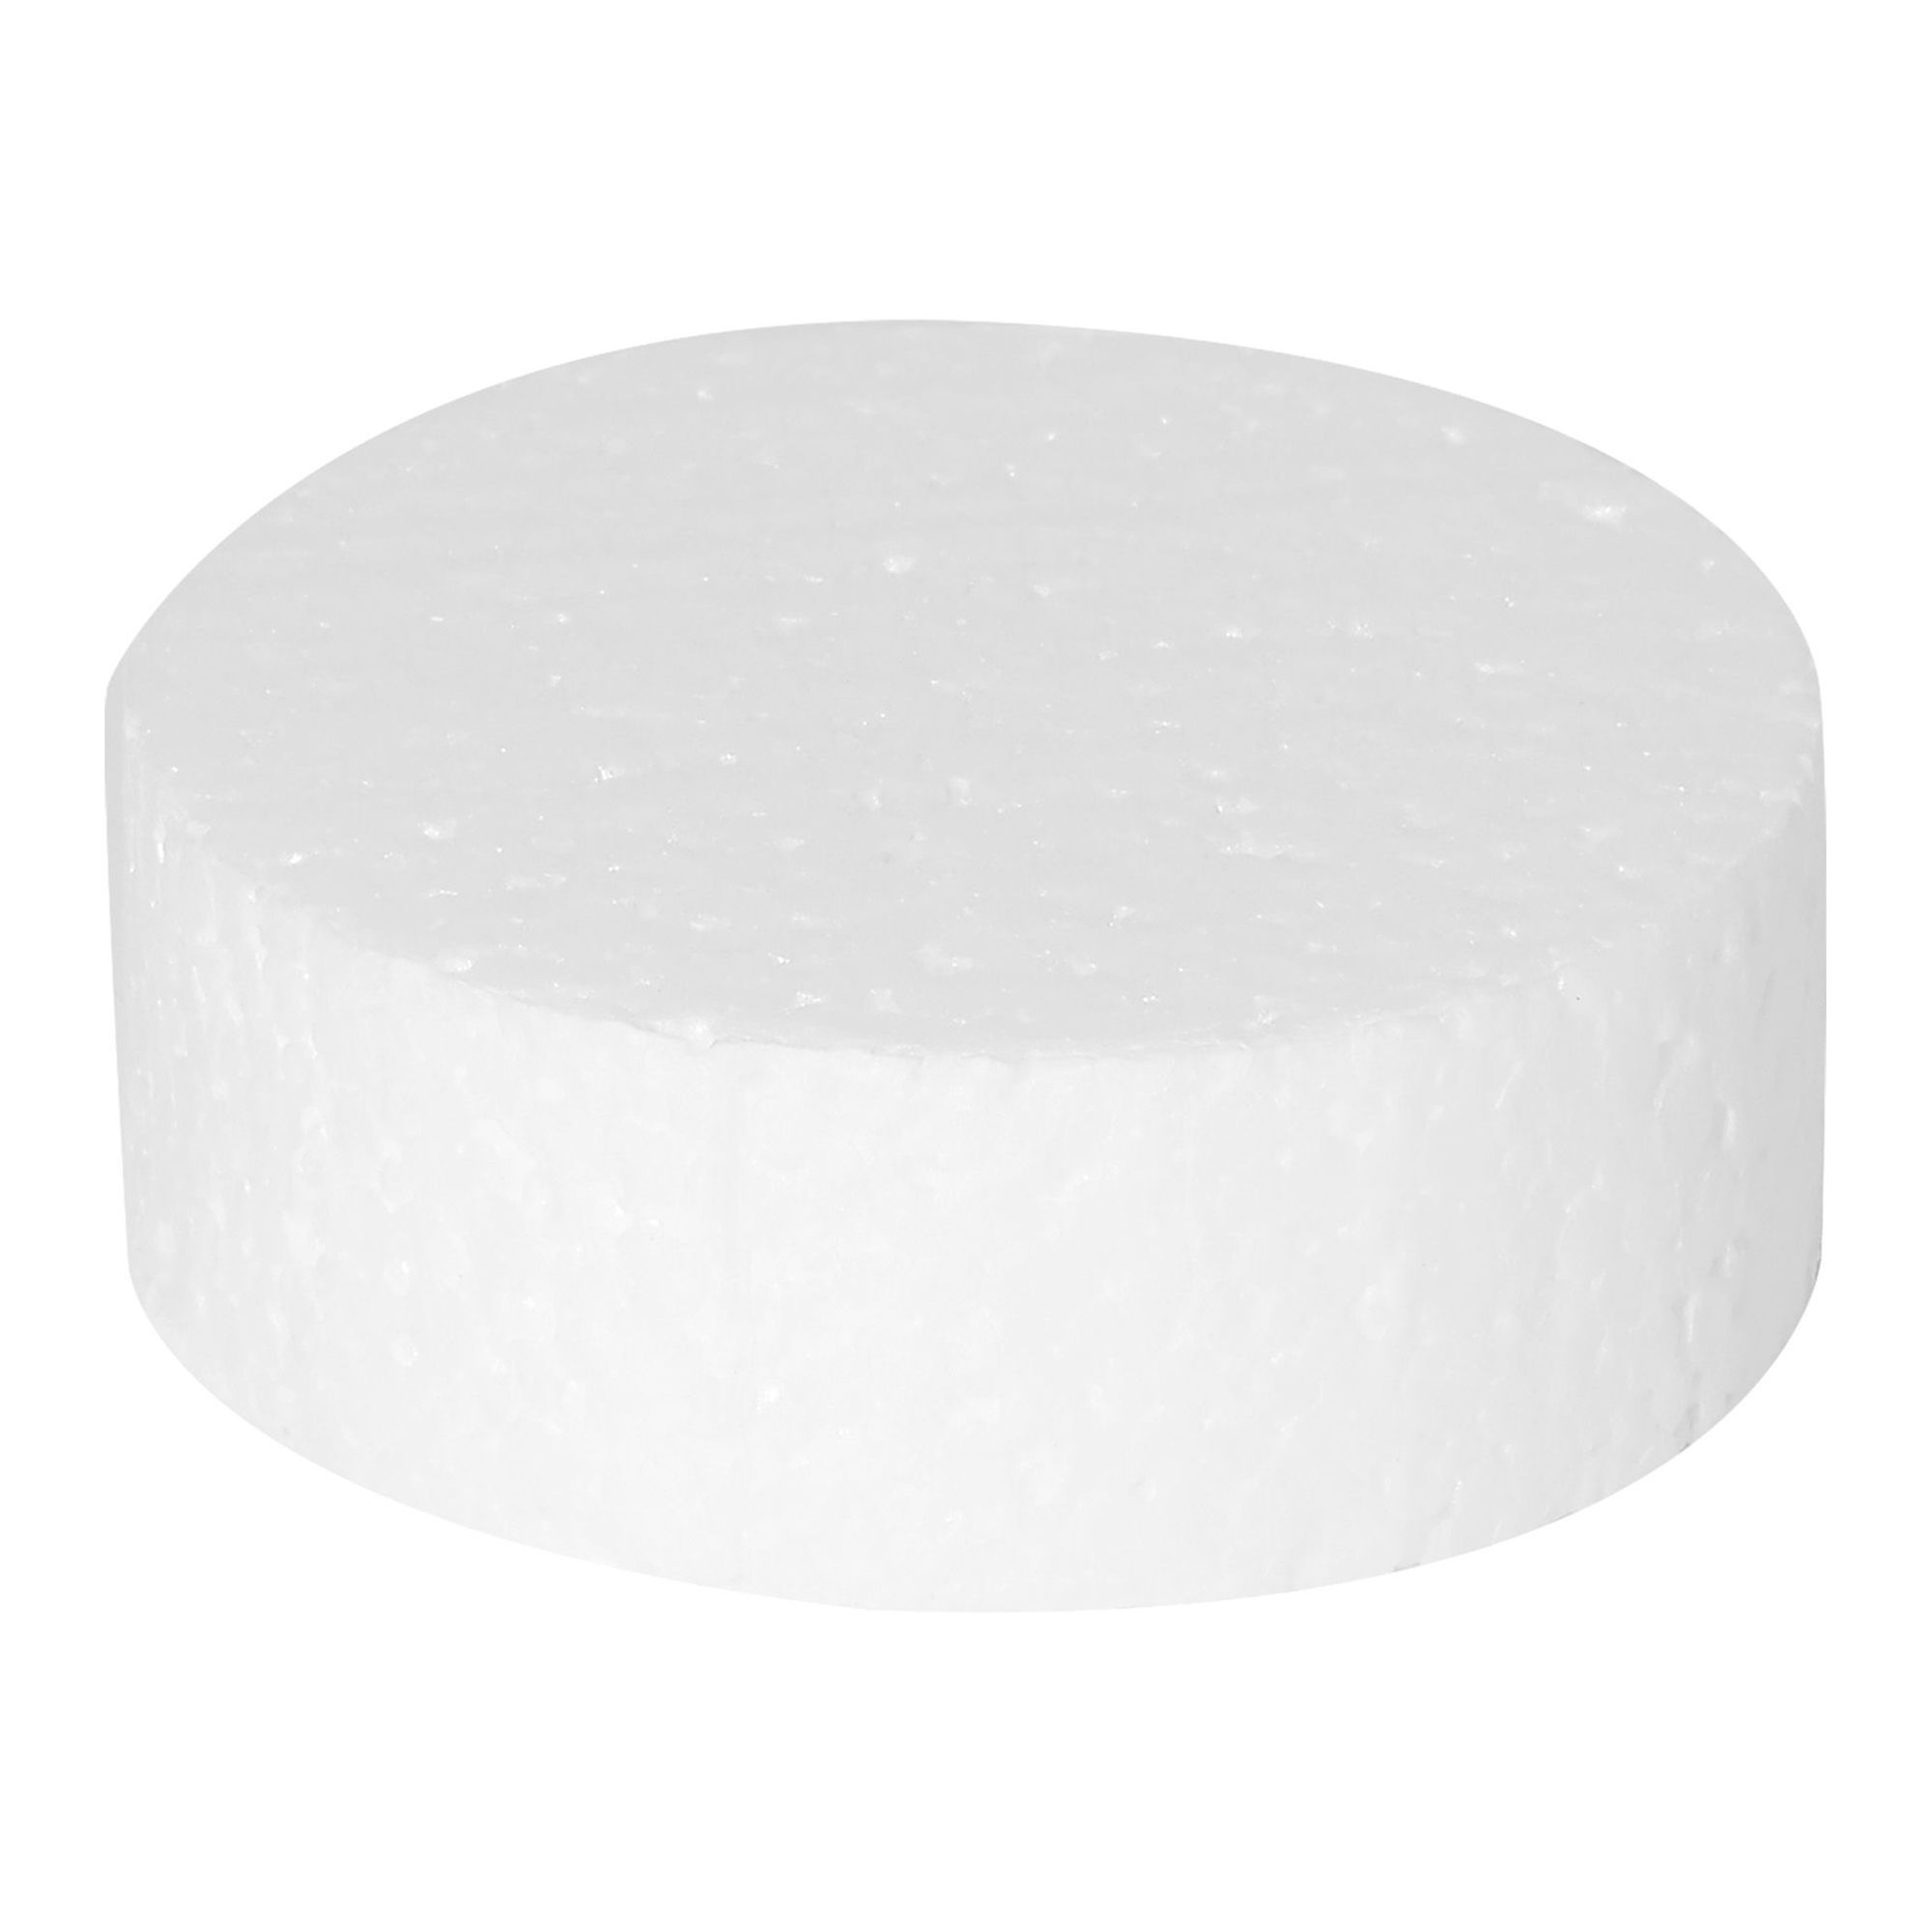 Juvale 24 Pack Foam Circles for Crafts - 3 inch Round Polystyrene Discs for DIY Projects (1 inch Thick, White)